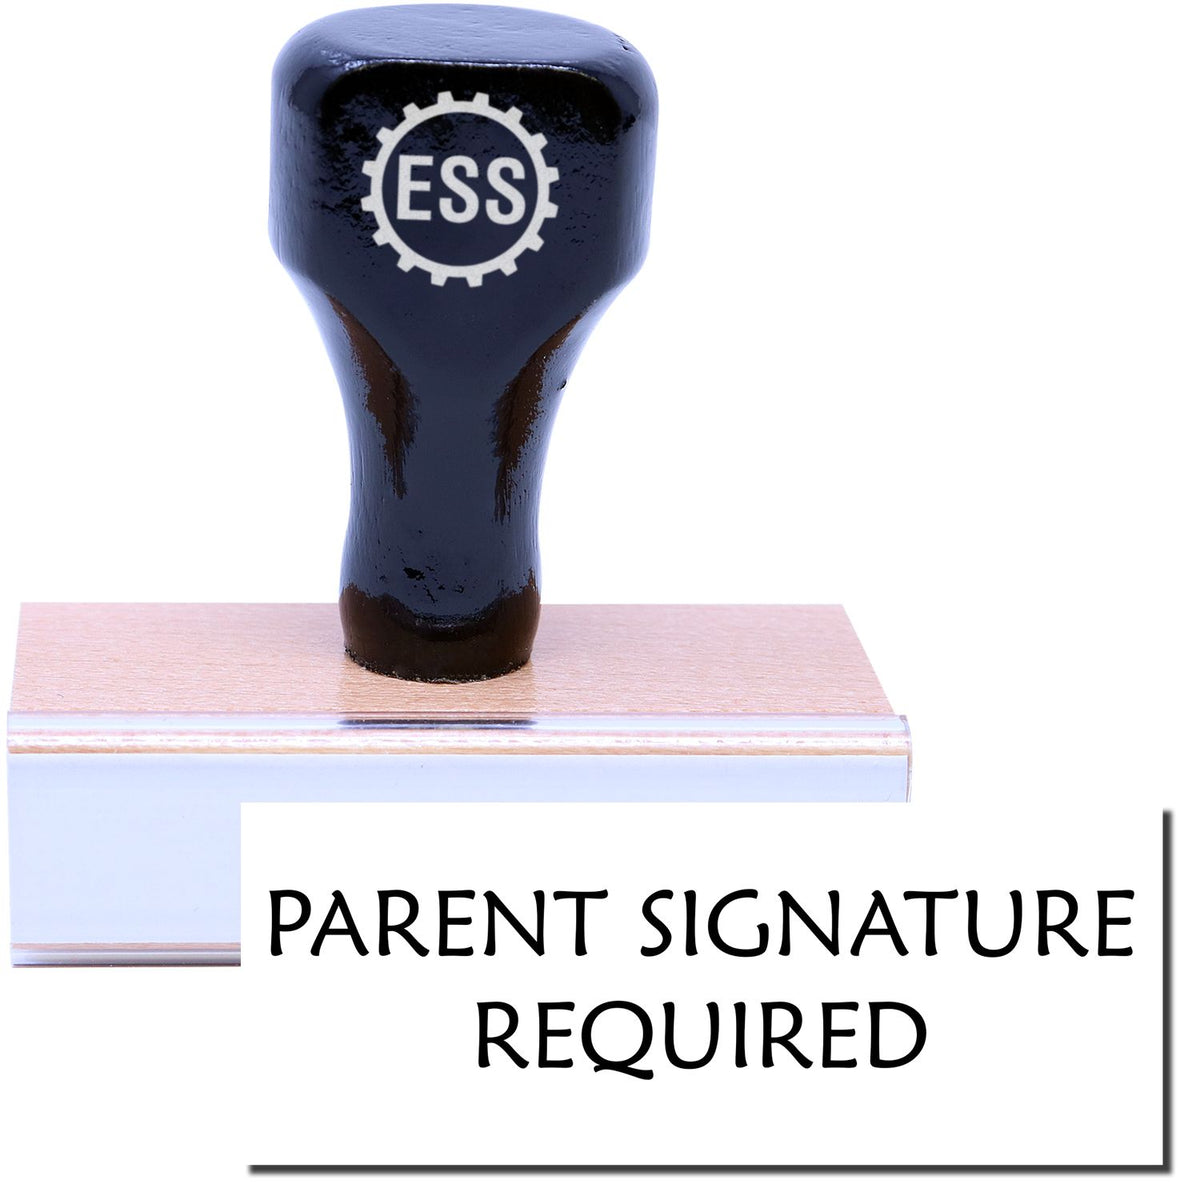 A stock office rubber stamp with a stamped image showing how the text &quot;PARENT SIGNATURE REQUIRED&quot; in a large font is displayed after stamping.